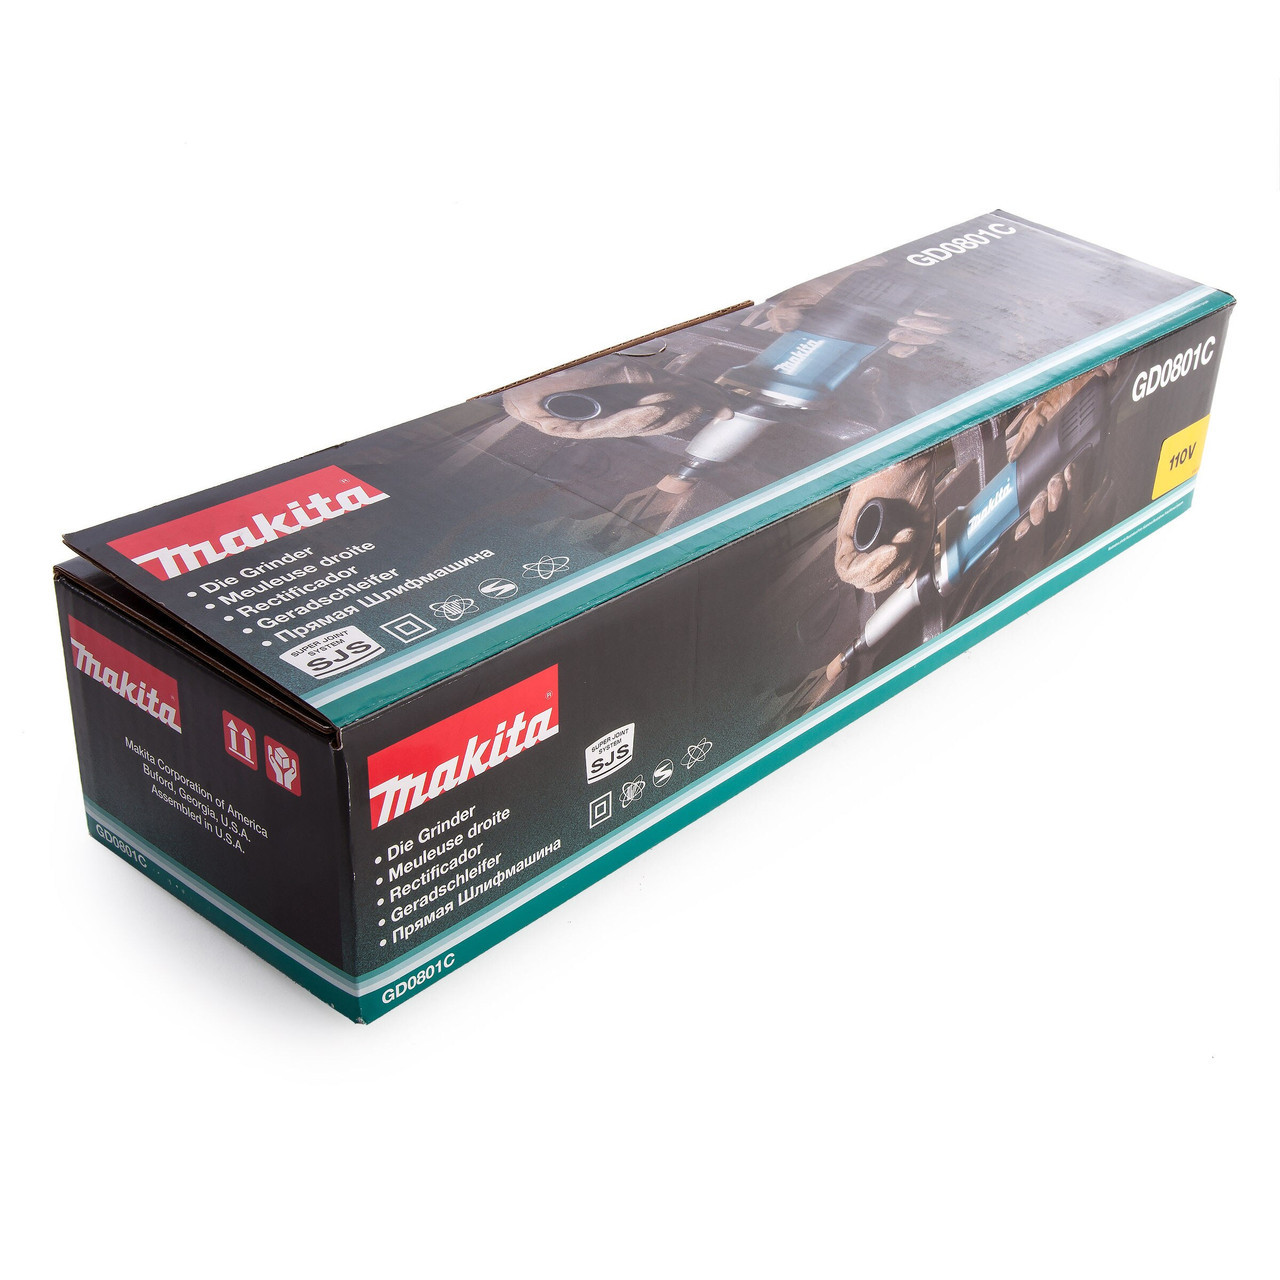 Makita GD0801C High Speed Die Grinder with Paddle Switch (110V)